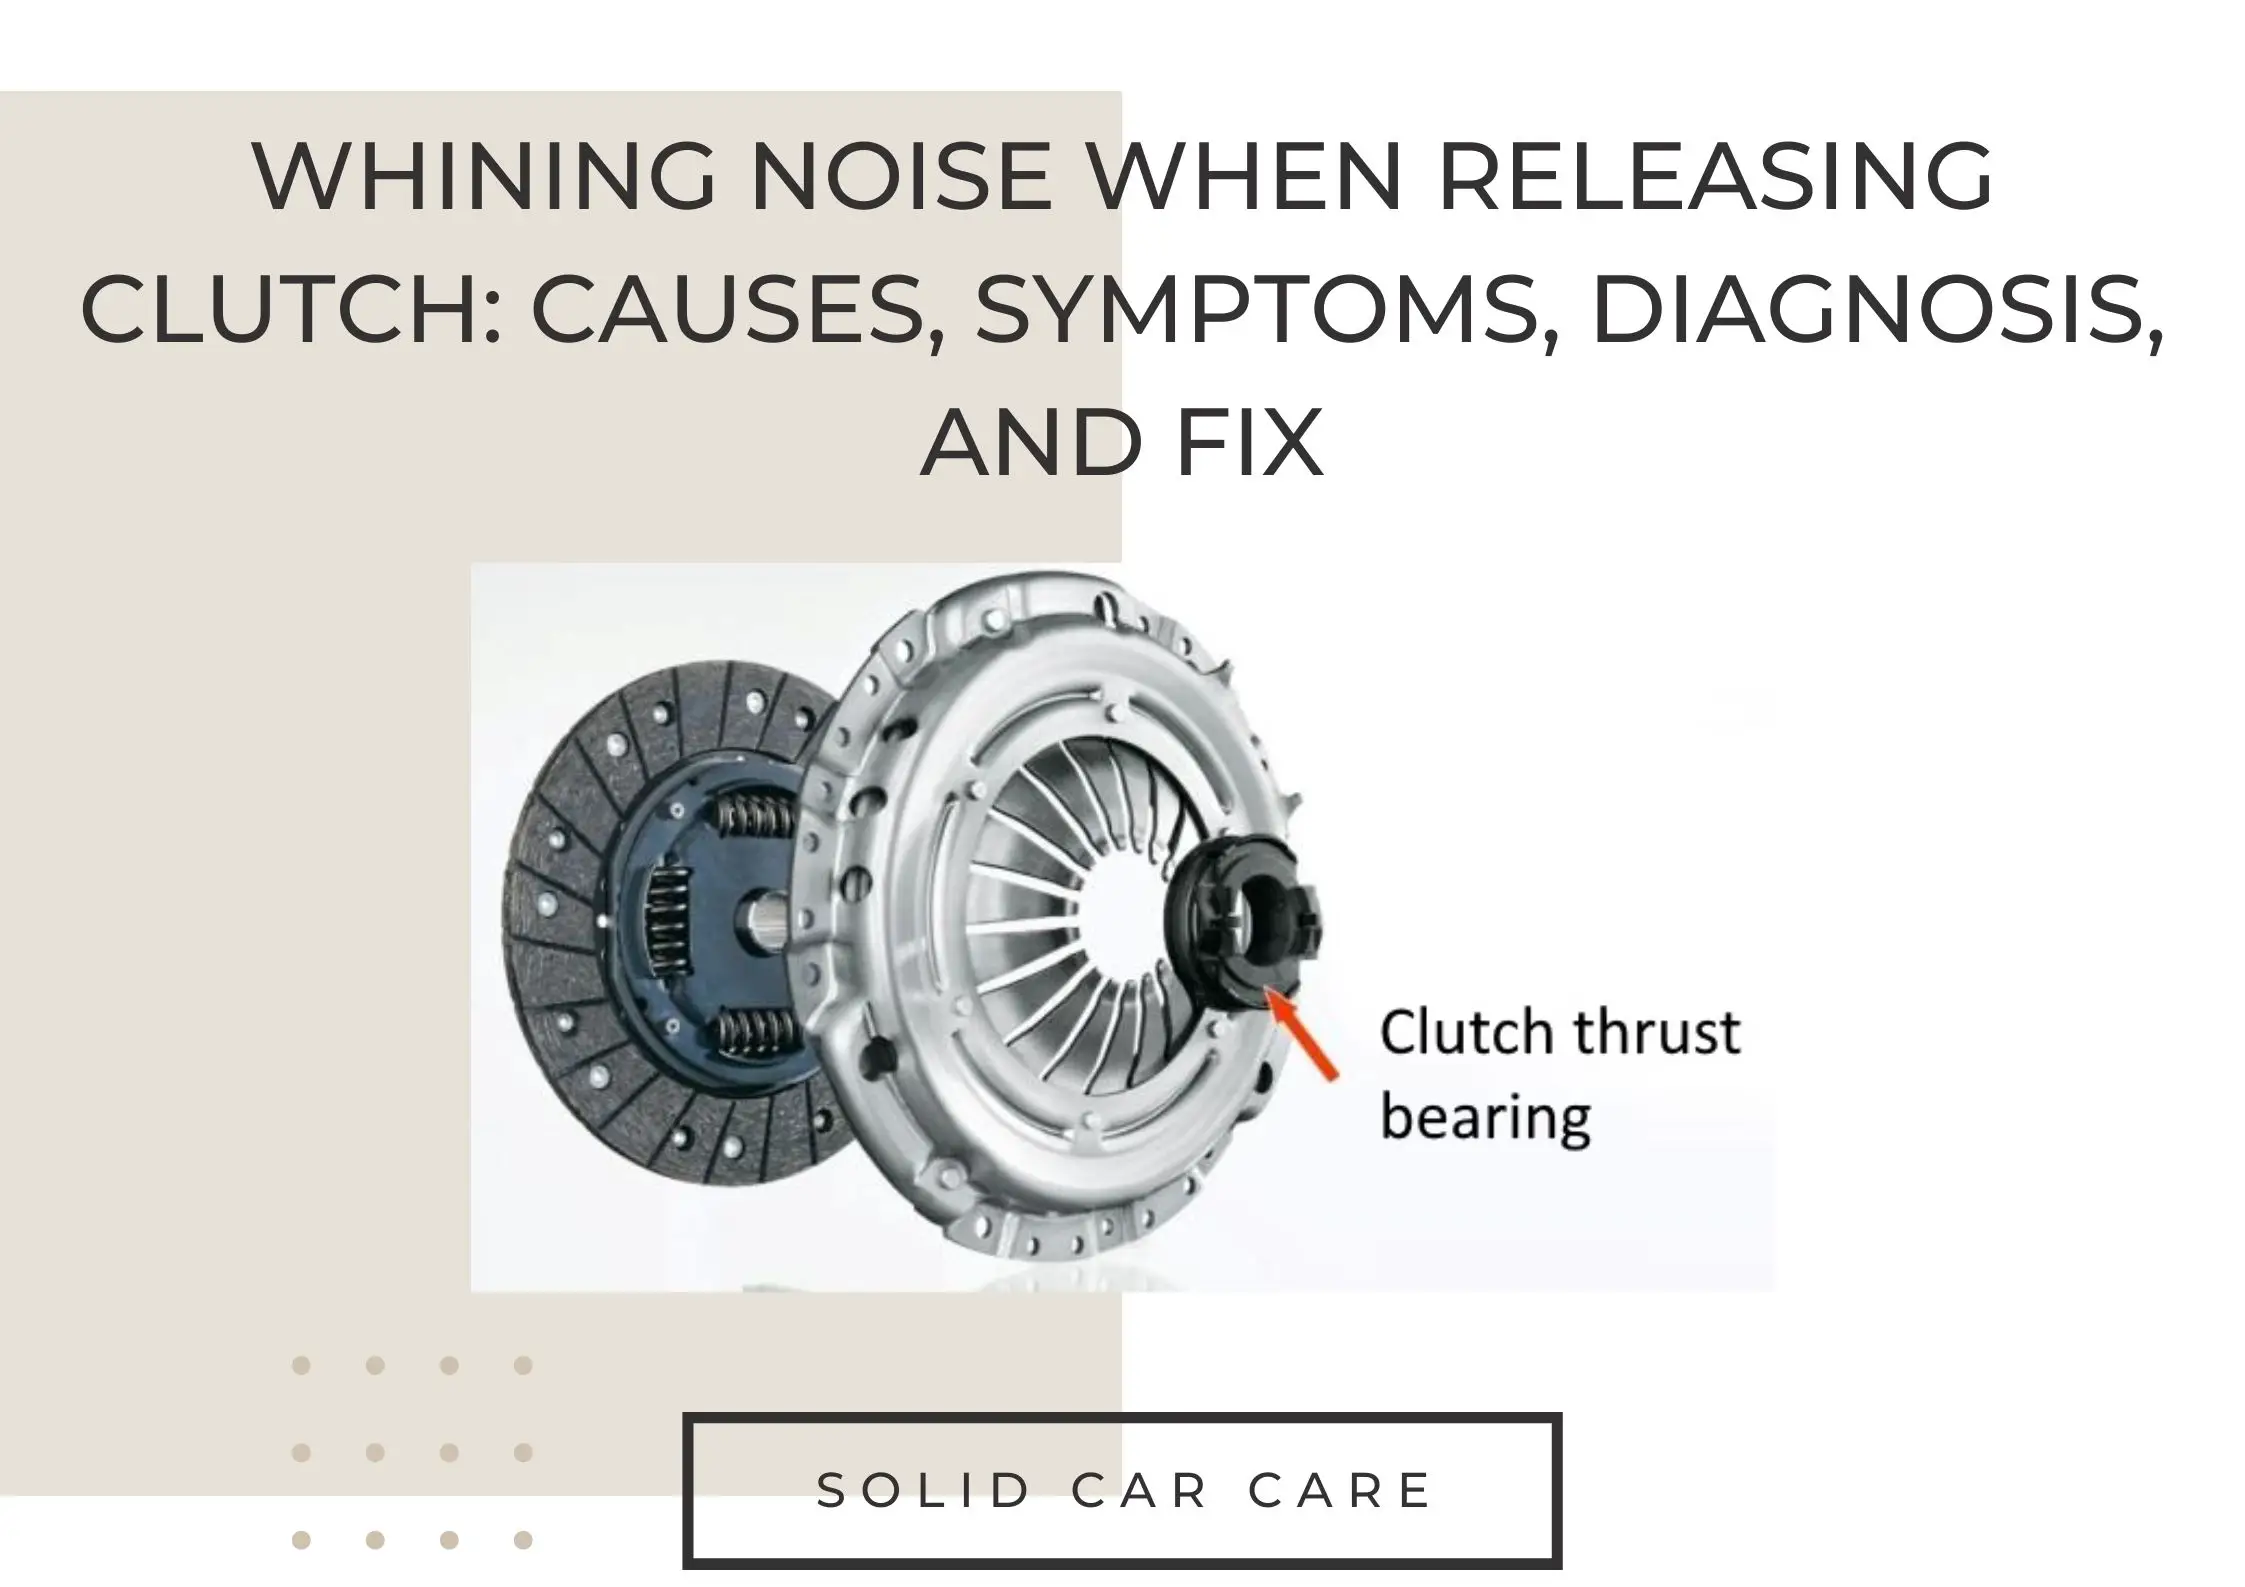 Whining Noise When Releasing Clutch: Causes, Symptoms, Diagnosis, and Fix